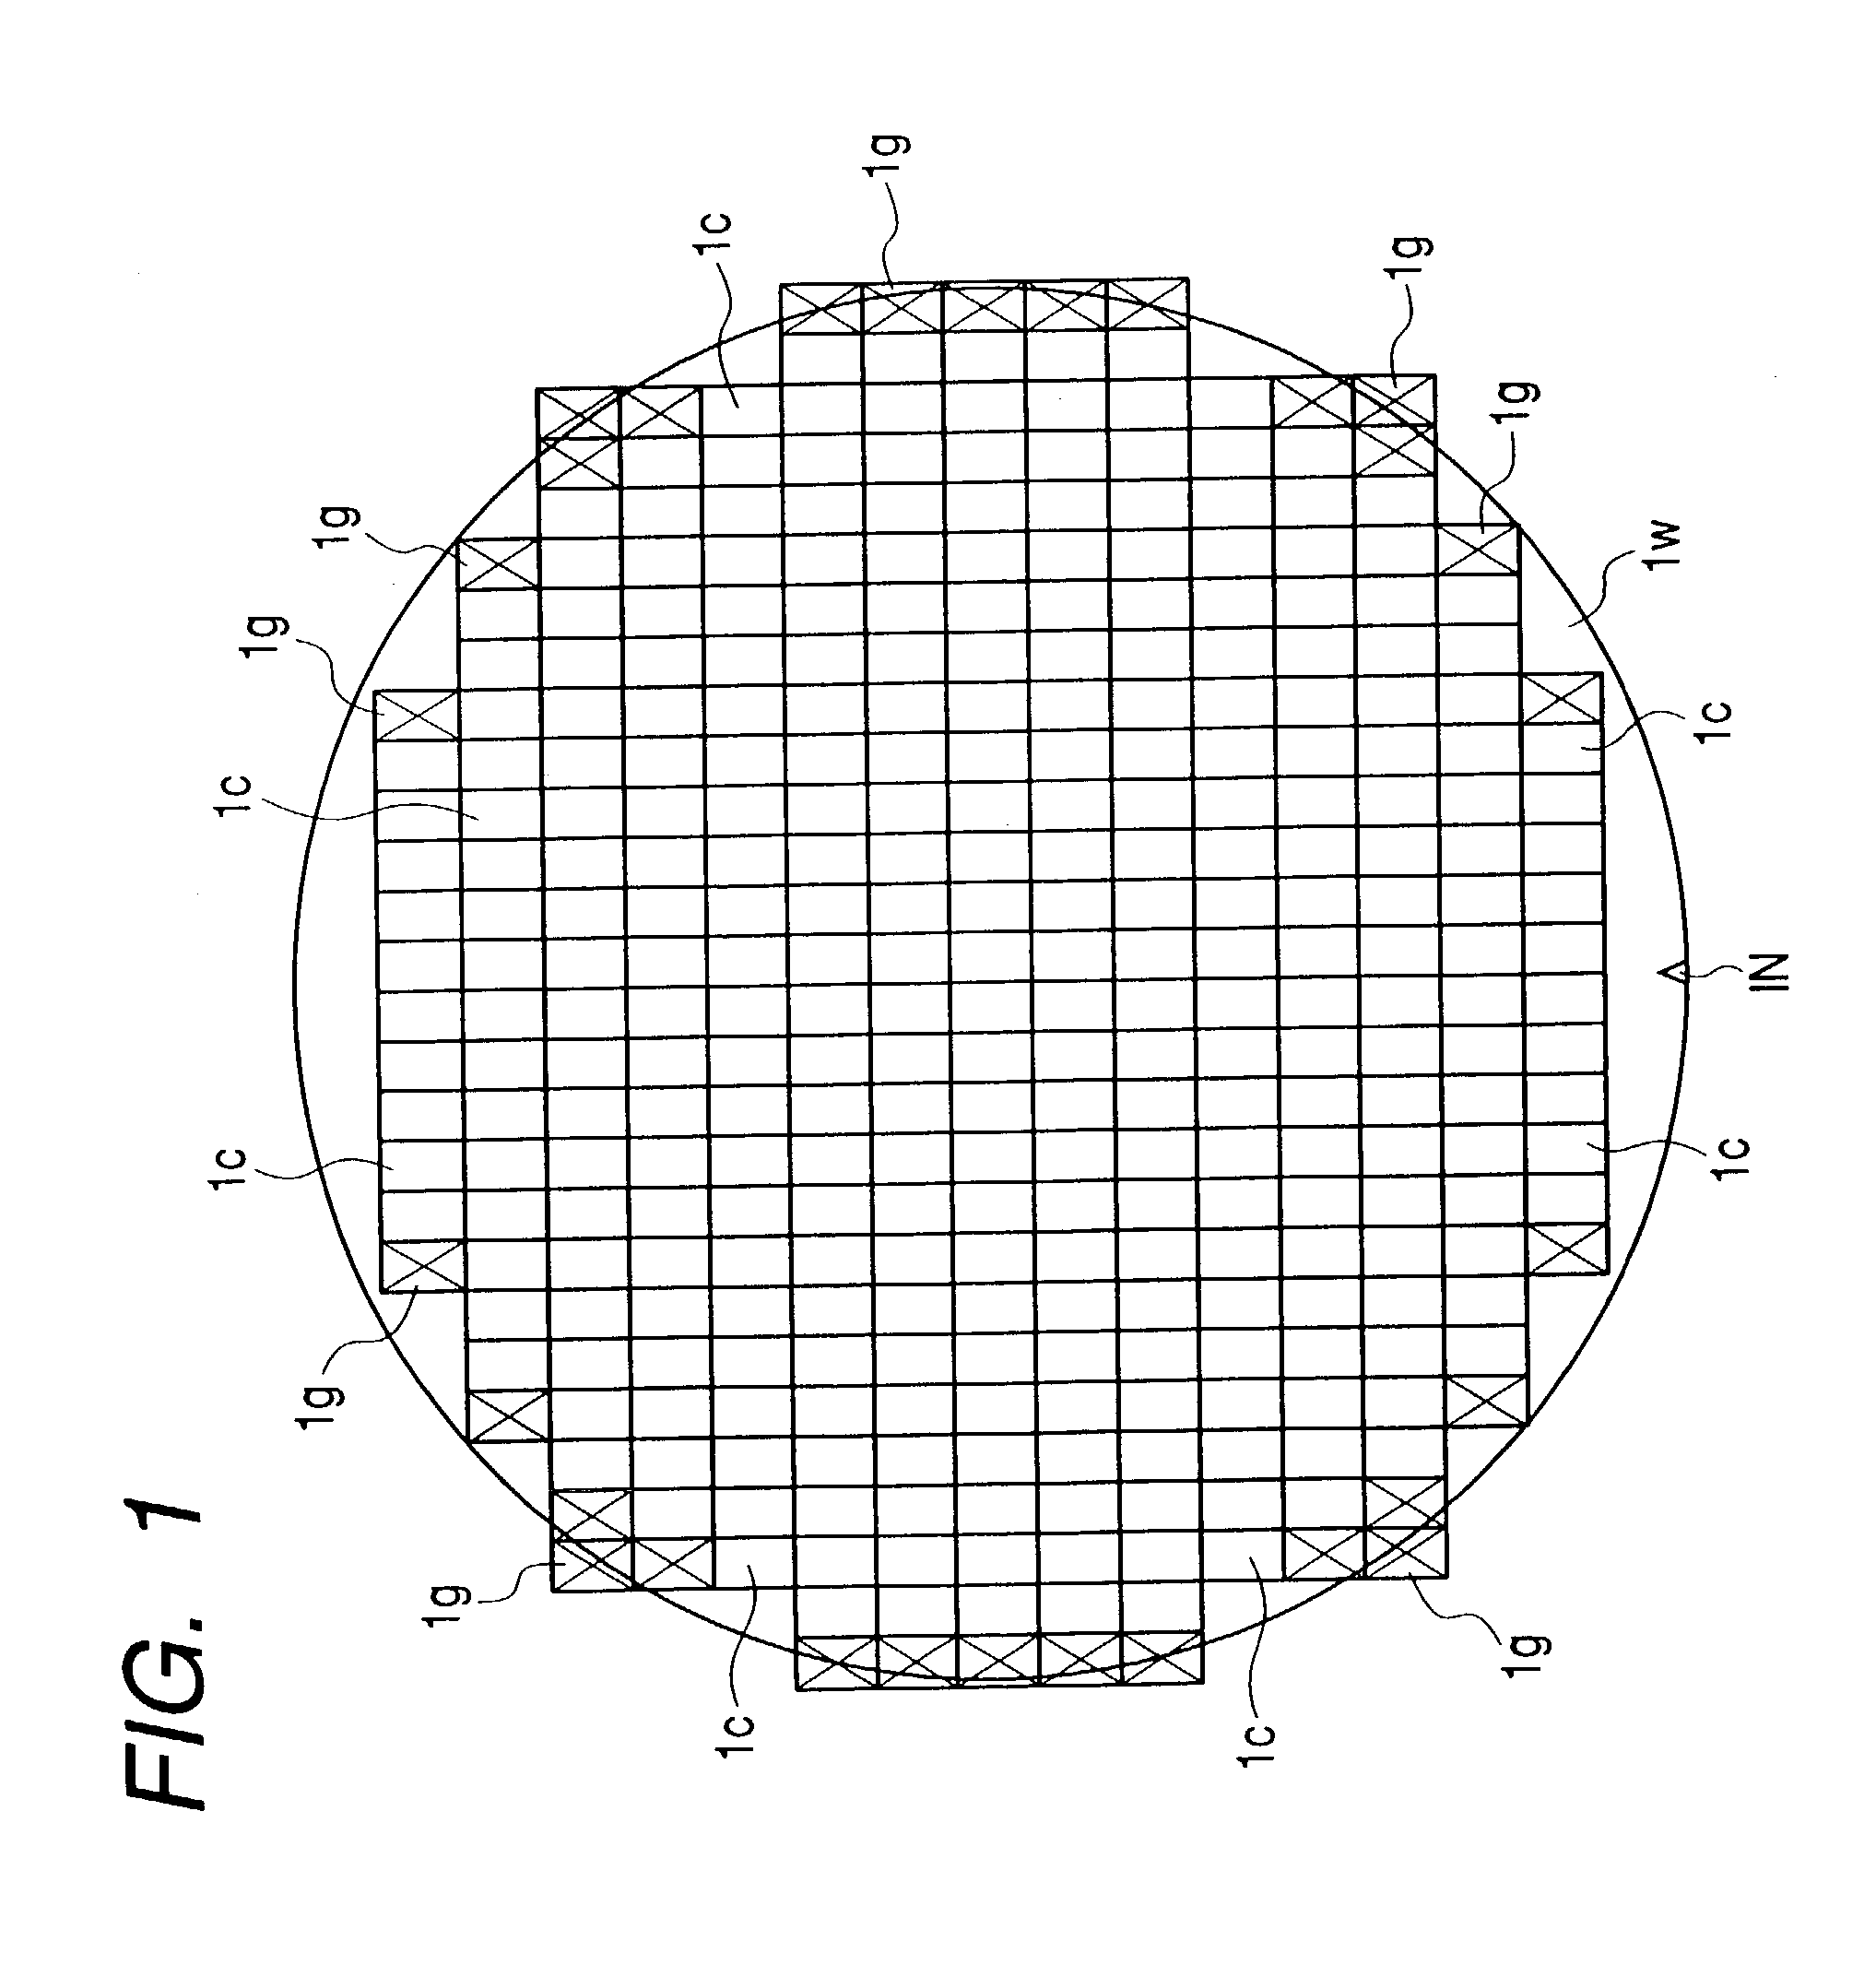 Semiconductor integrated circuit device including dummy patterns located to reduce dishing